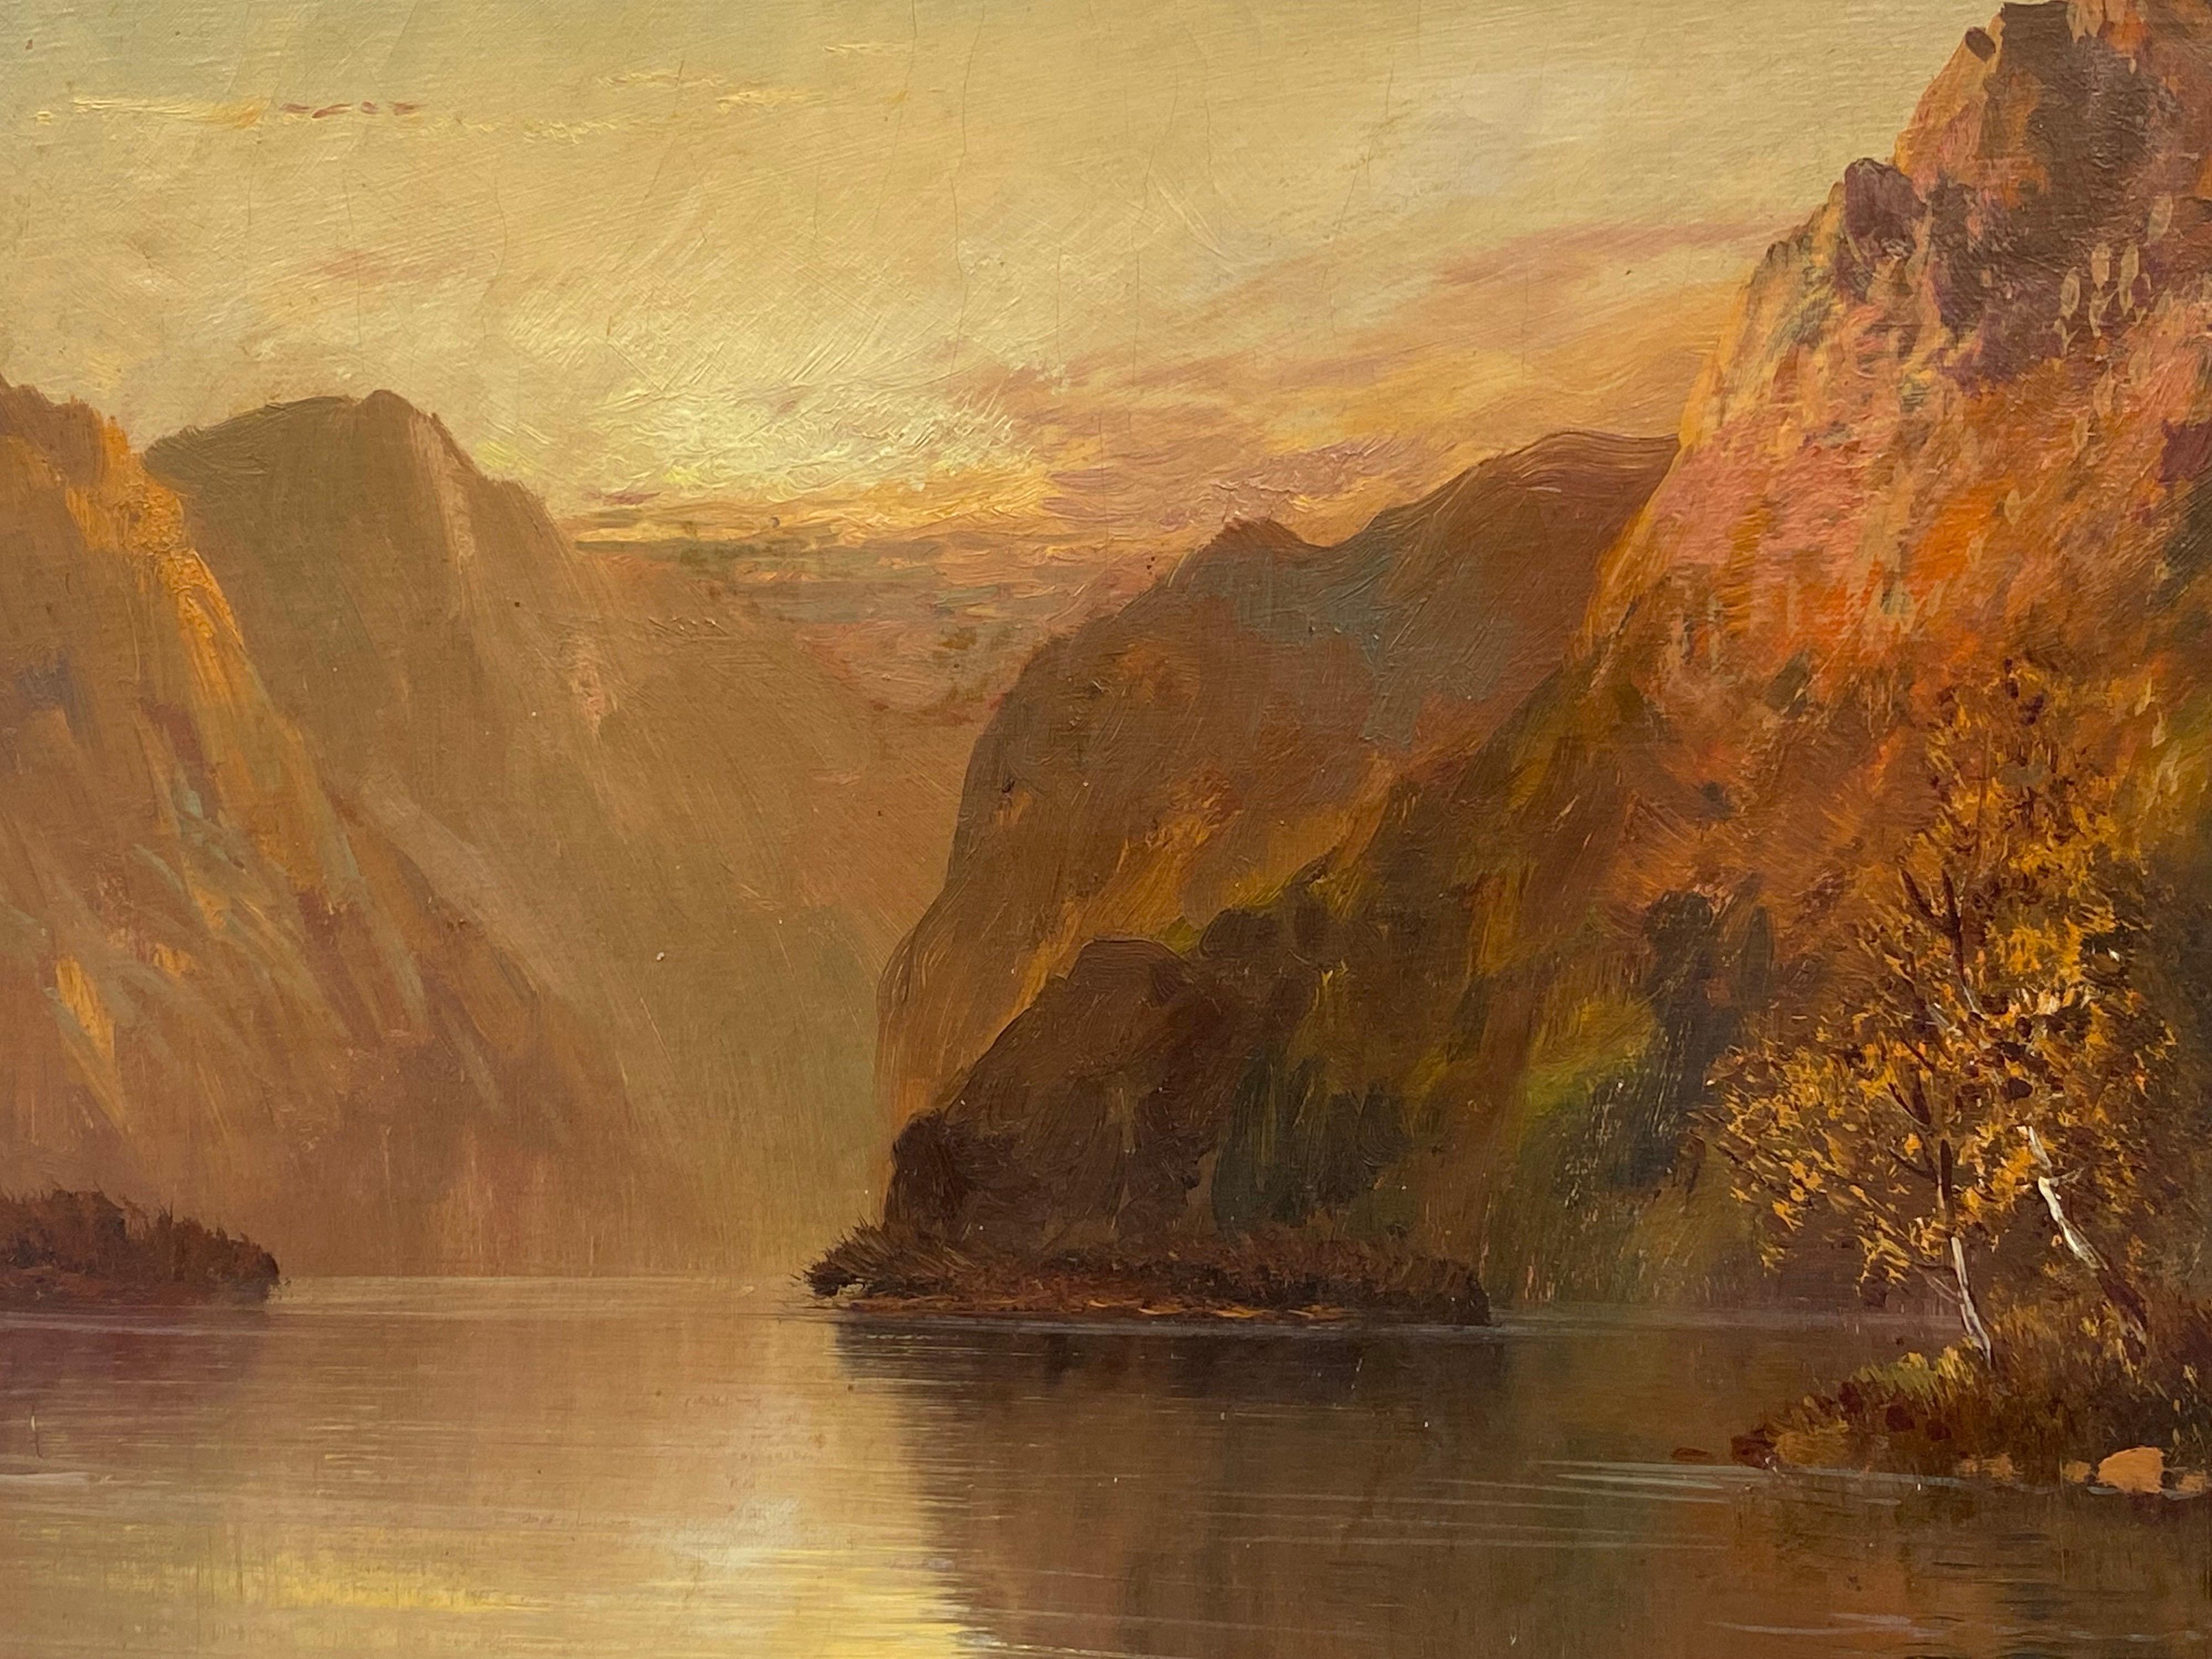 Antique Scottish Highlands Oil Painting Sunset Loch Landscape with Mountains - Brown Landscape Painting by Francis E. Jamieson